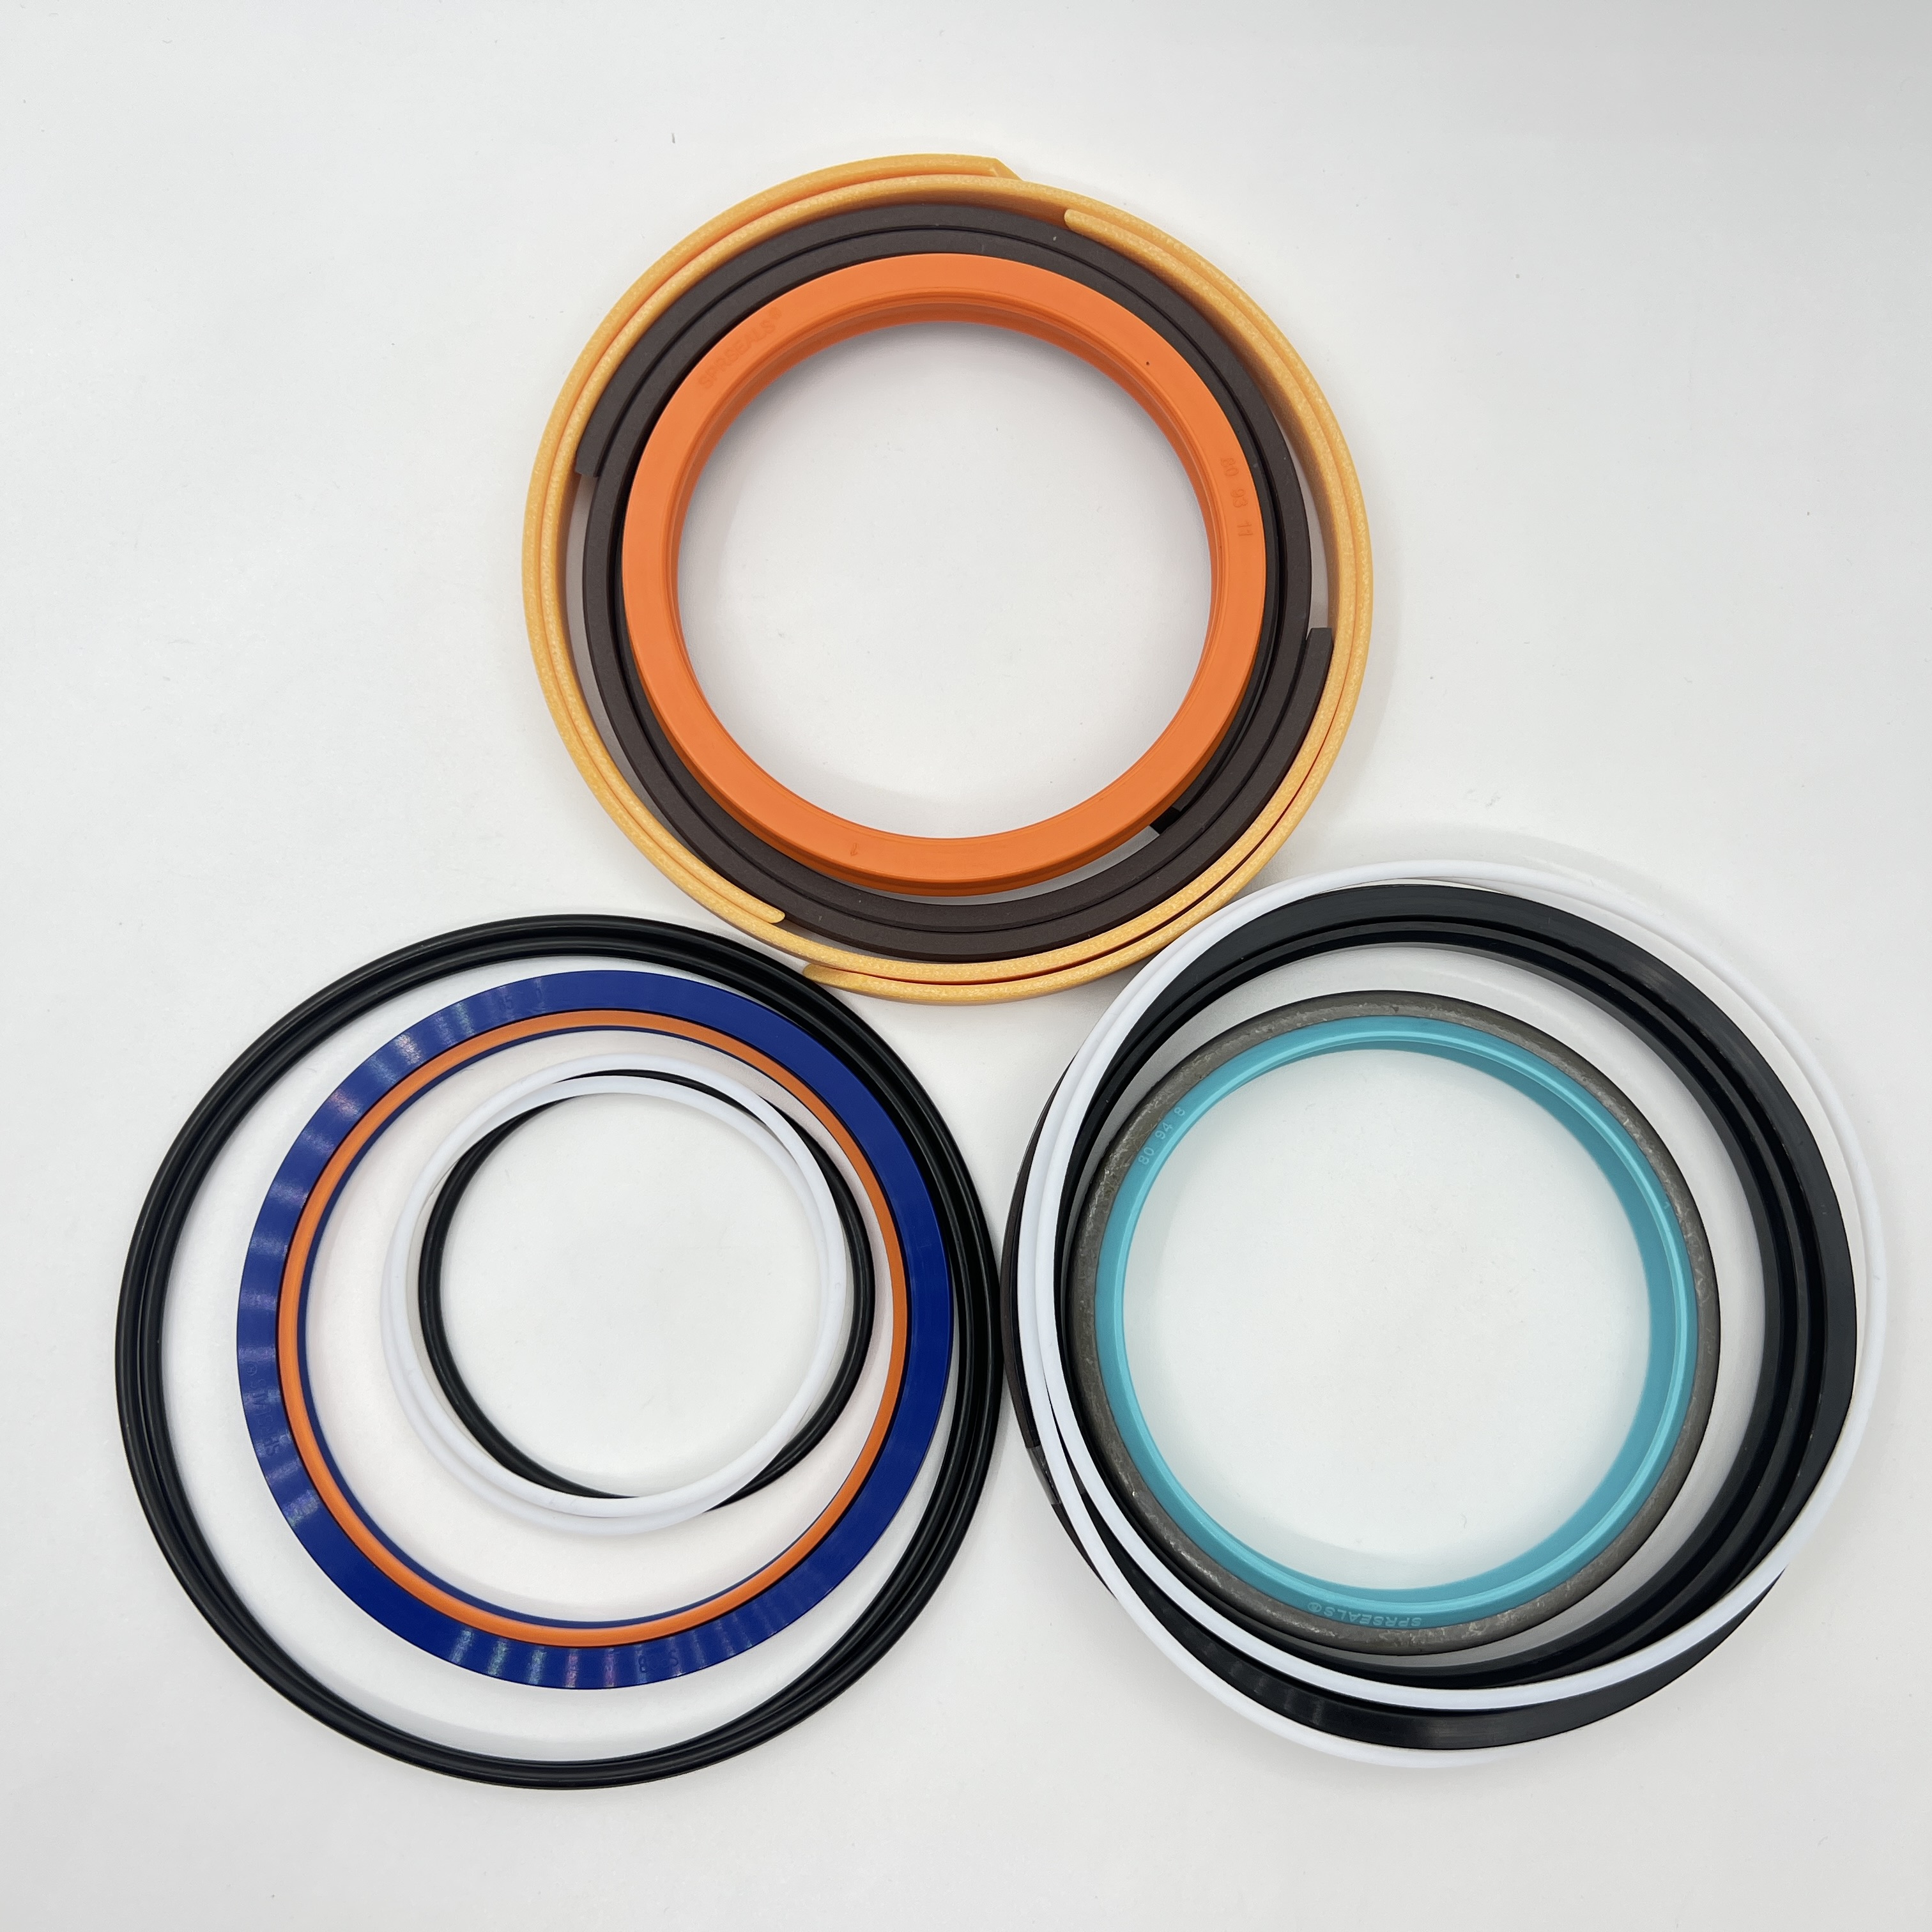 Zaxis BOOM CILINDER SEAL KIT